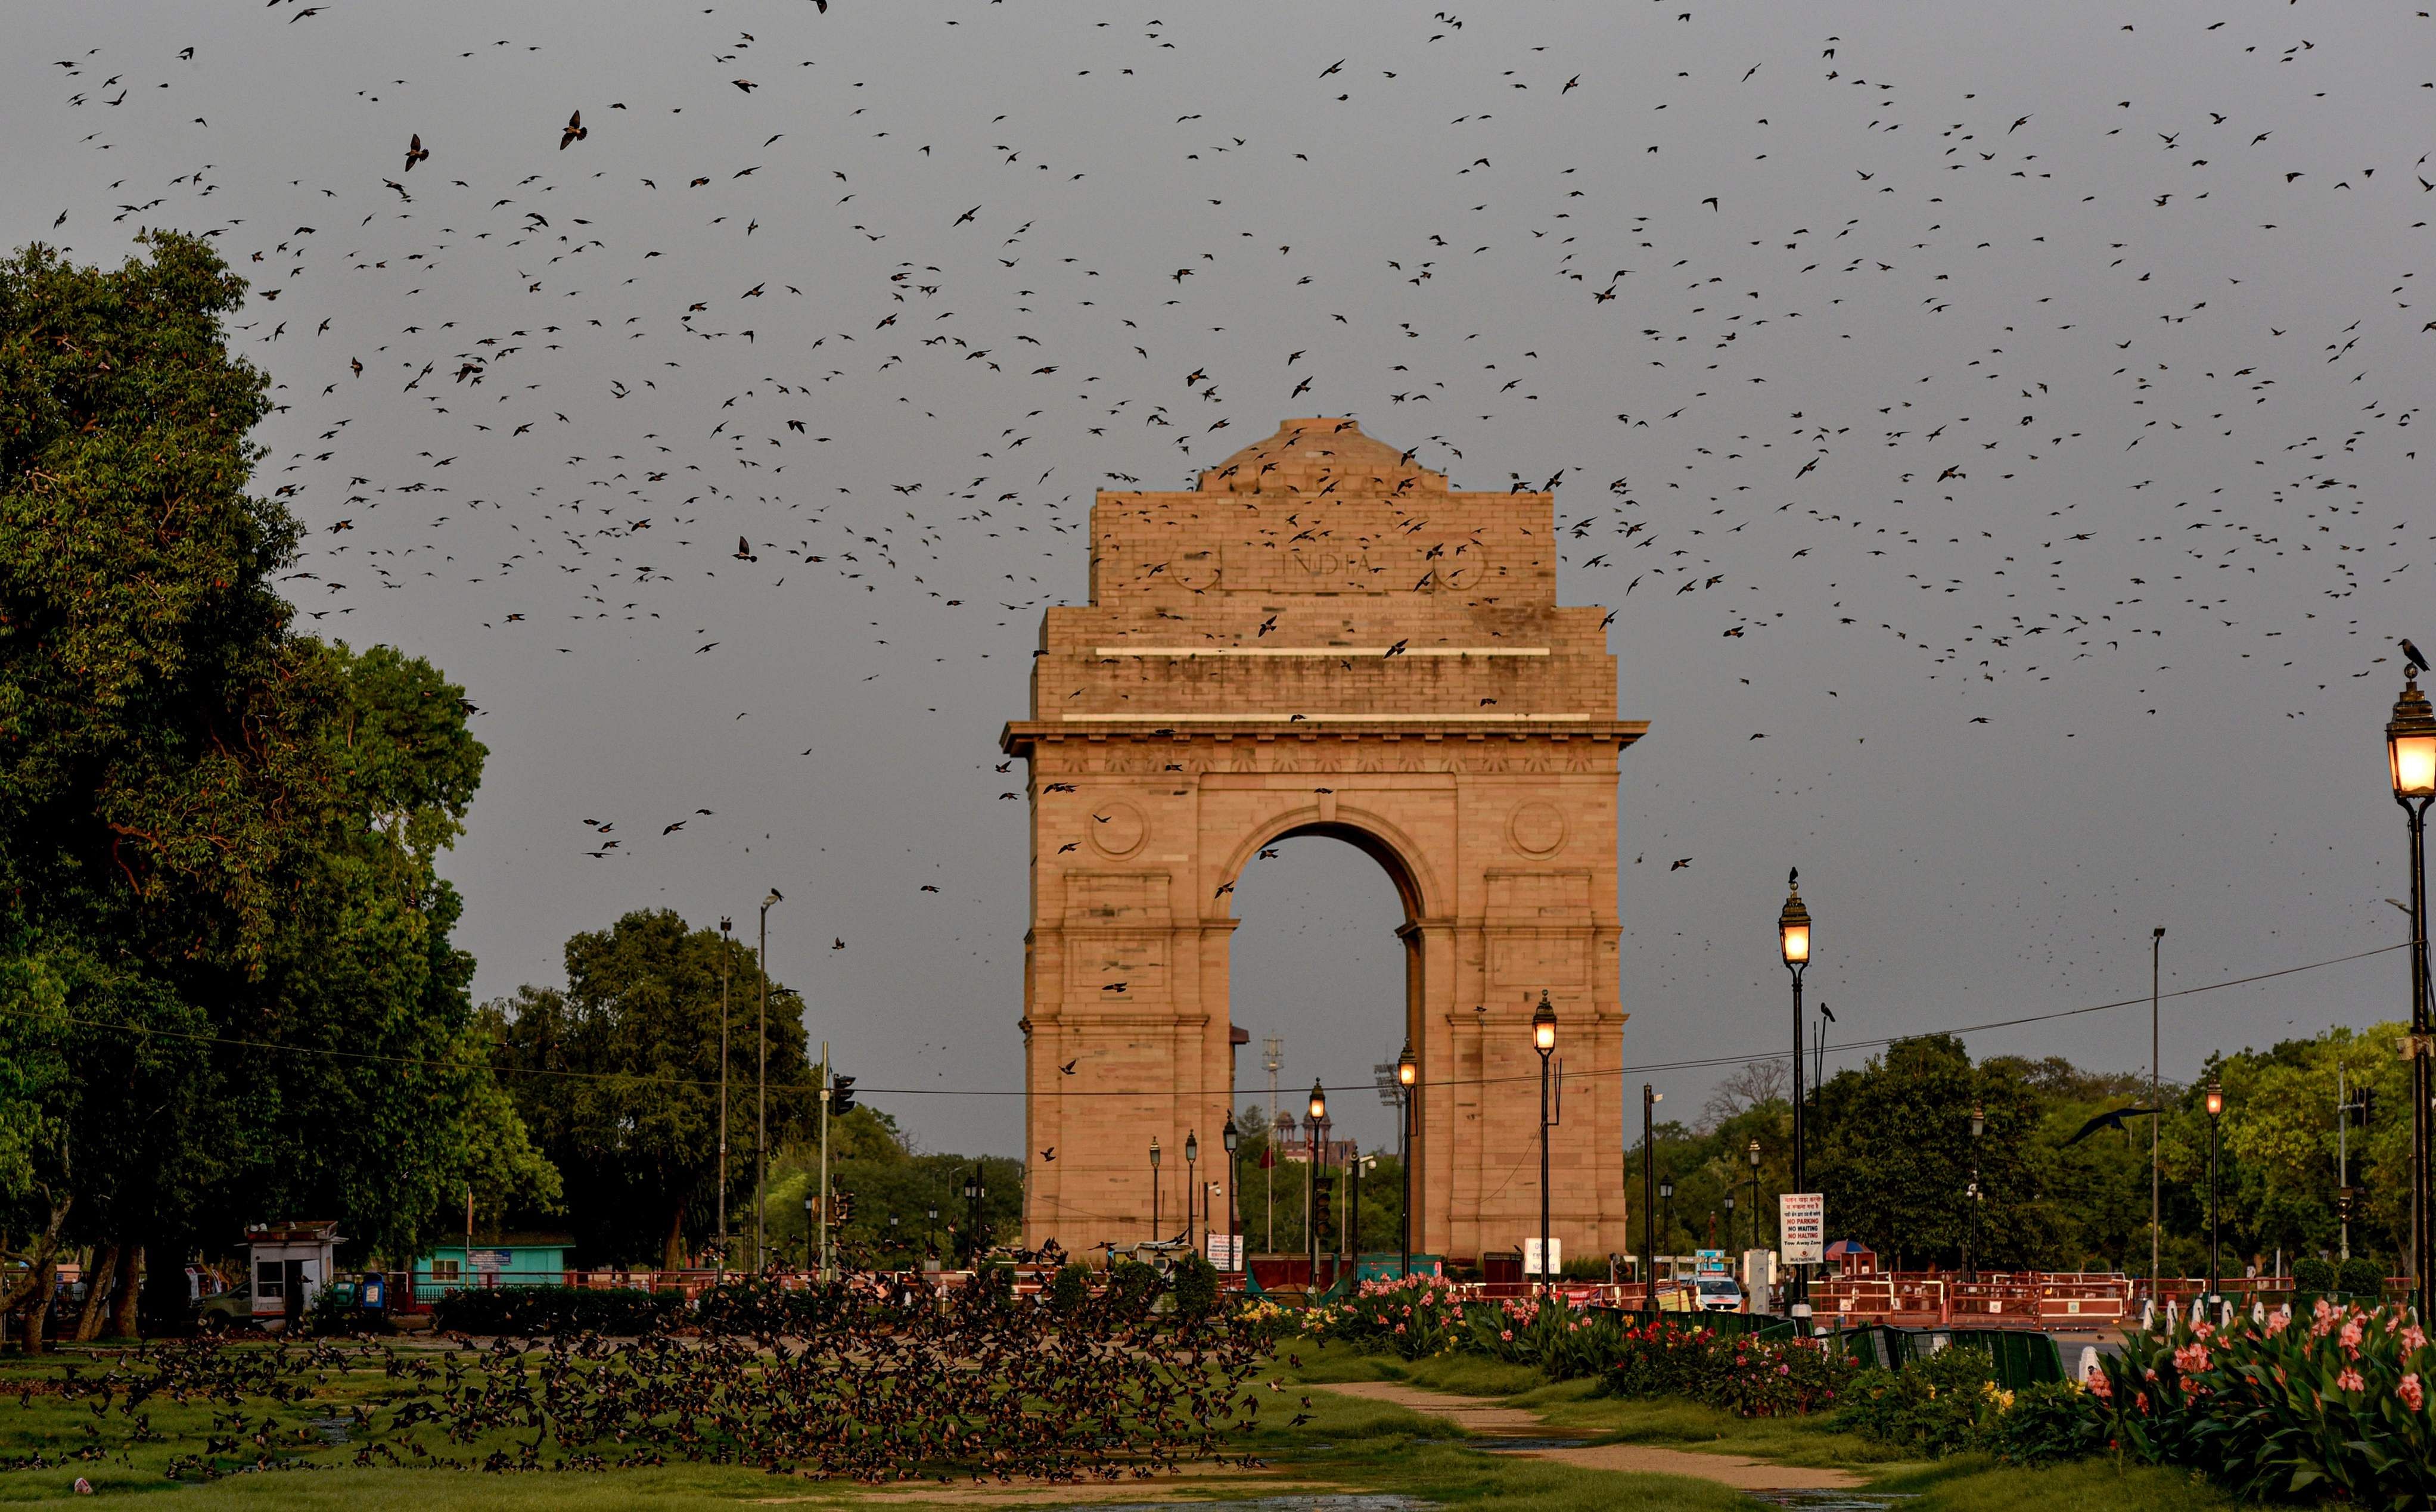 A flock of birds flying over India Gate during a nationwide lockdown, in New Delhi. (Credit: PTI)